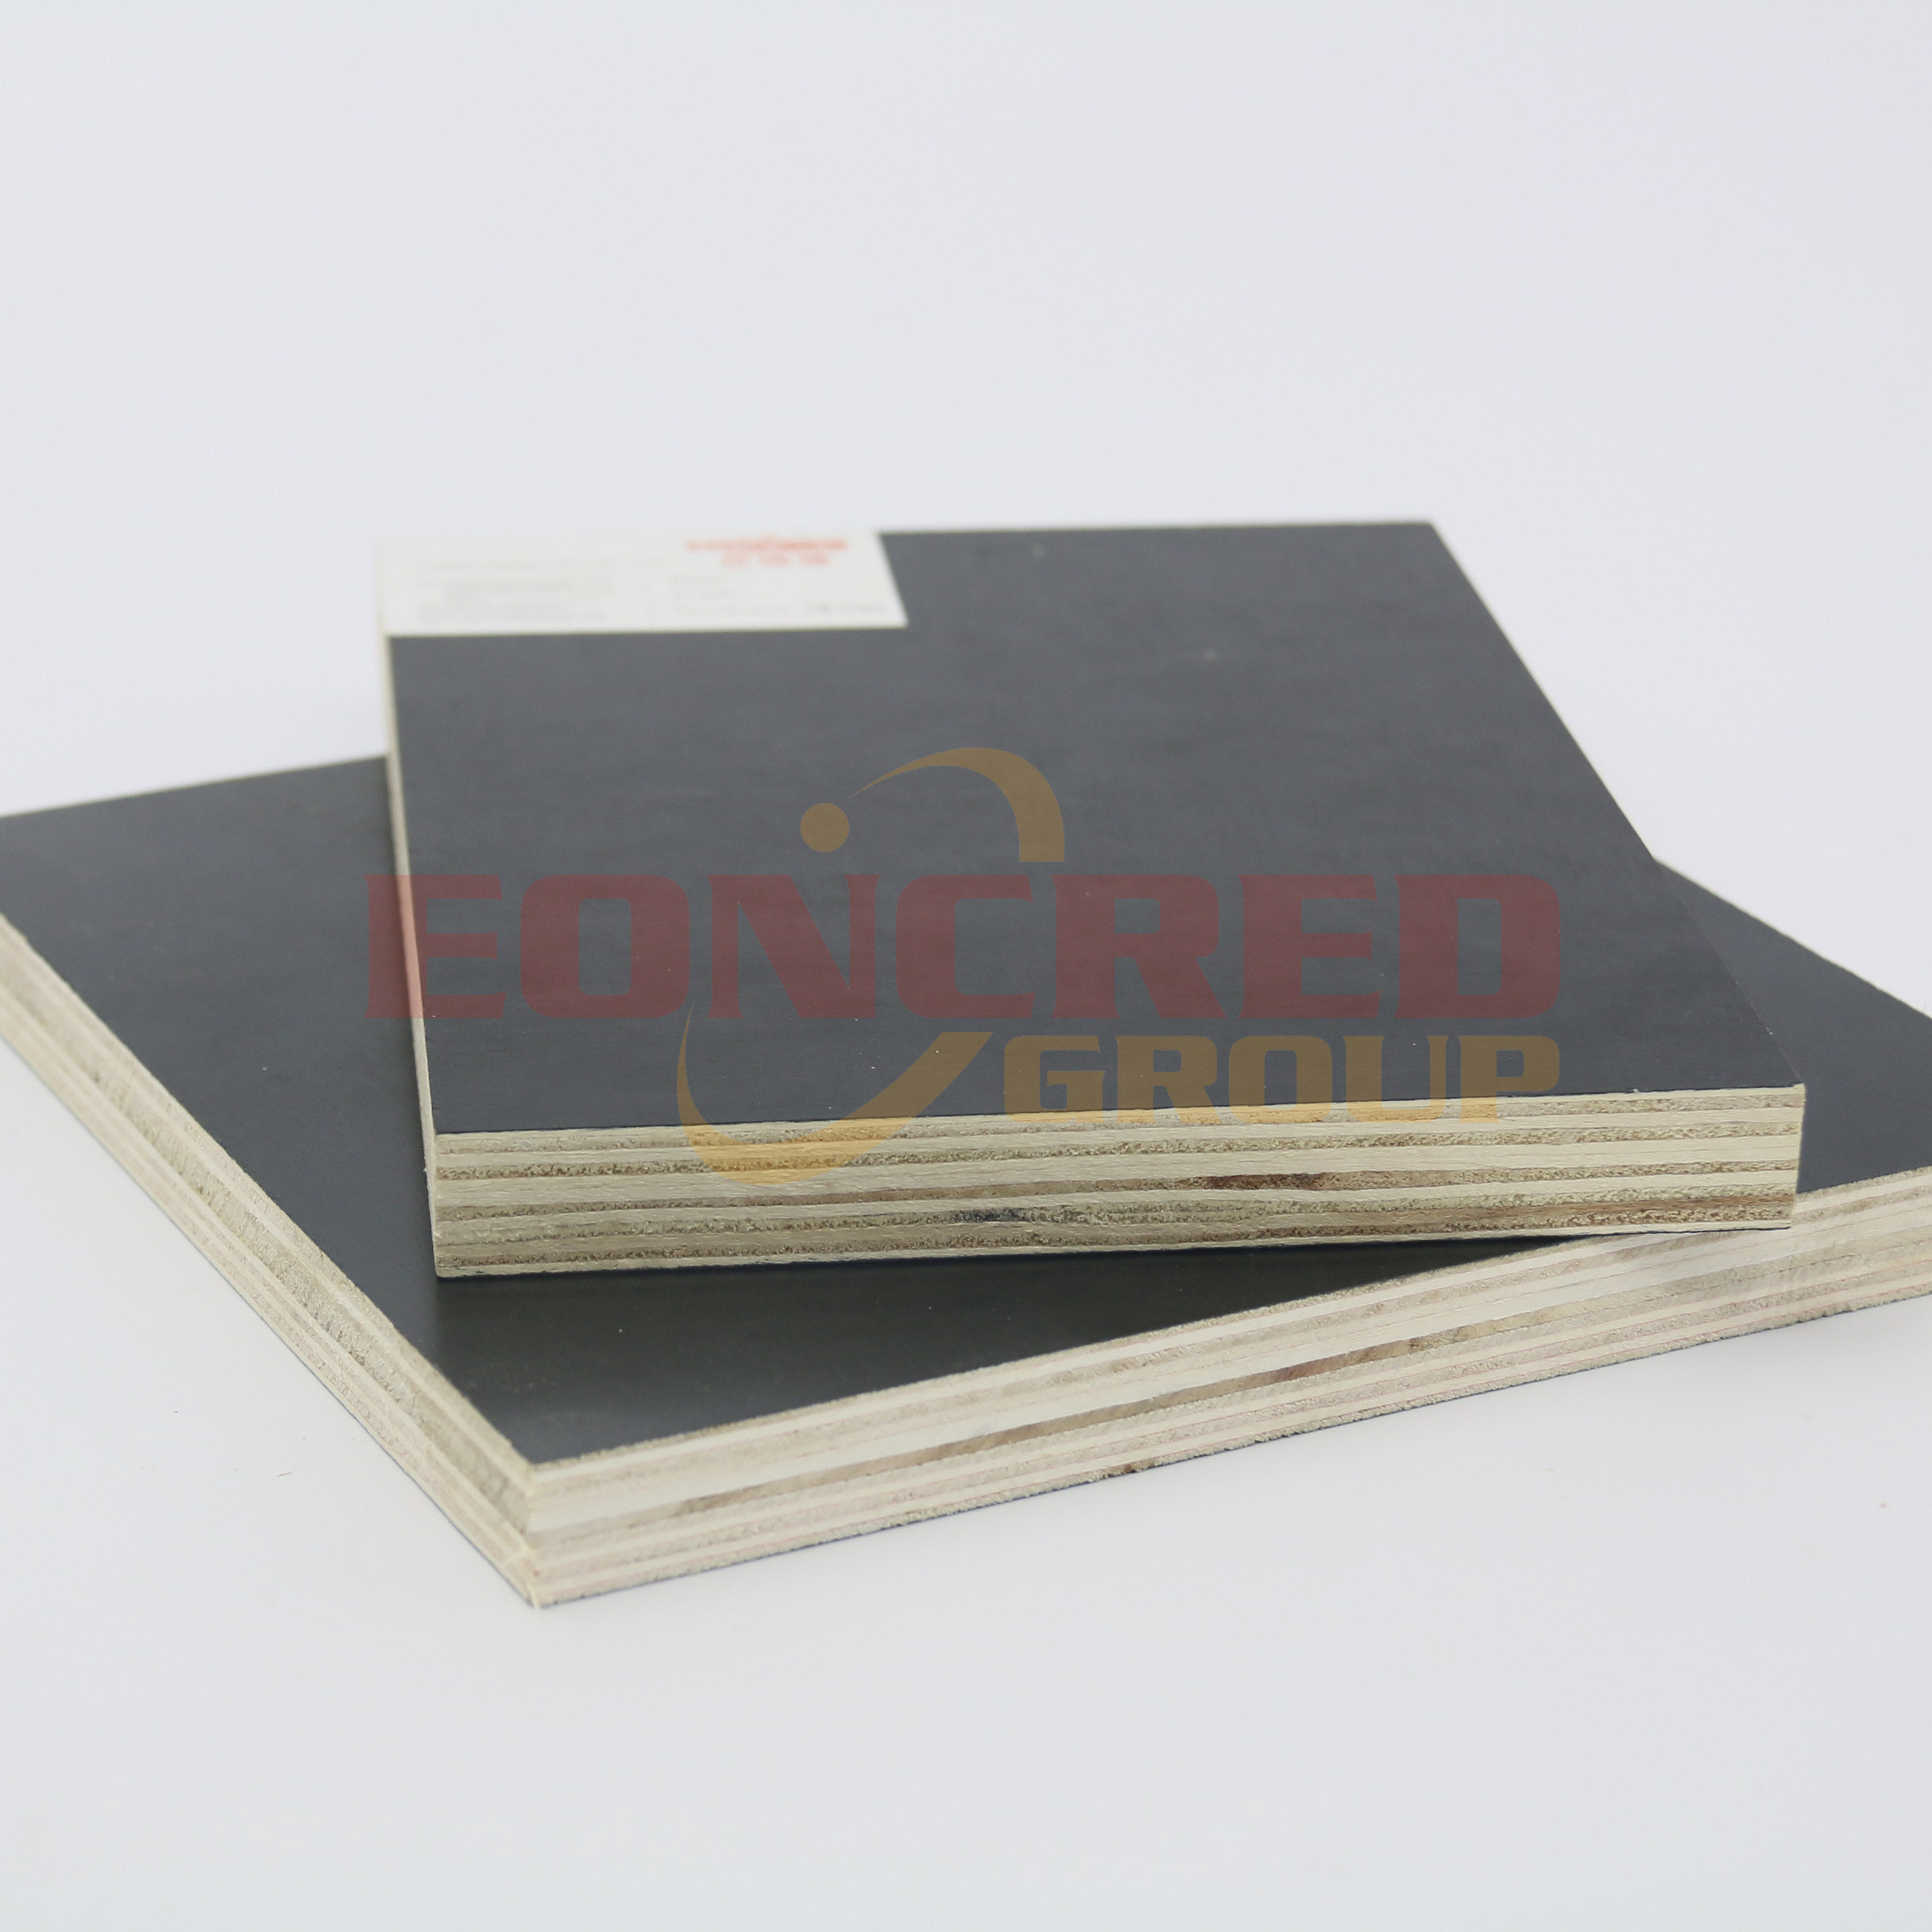 18mm Film Faced Plywood/concrete Formwork Plywood For Construction